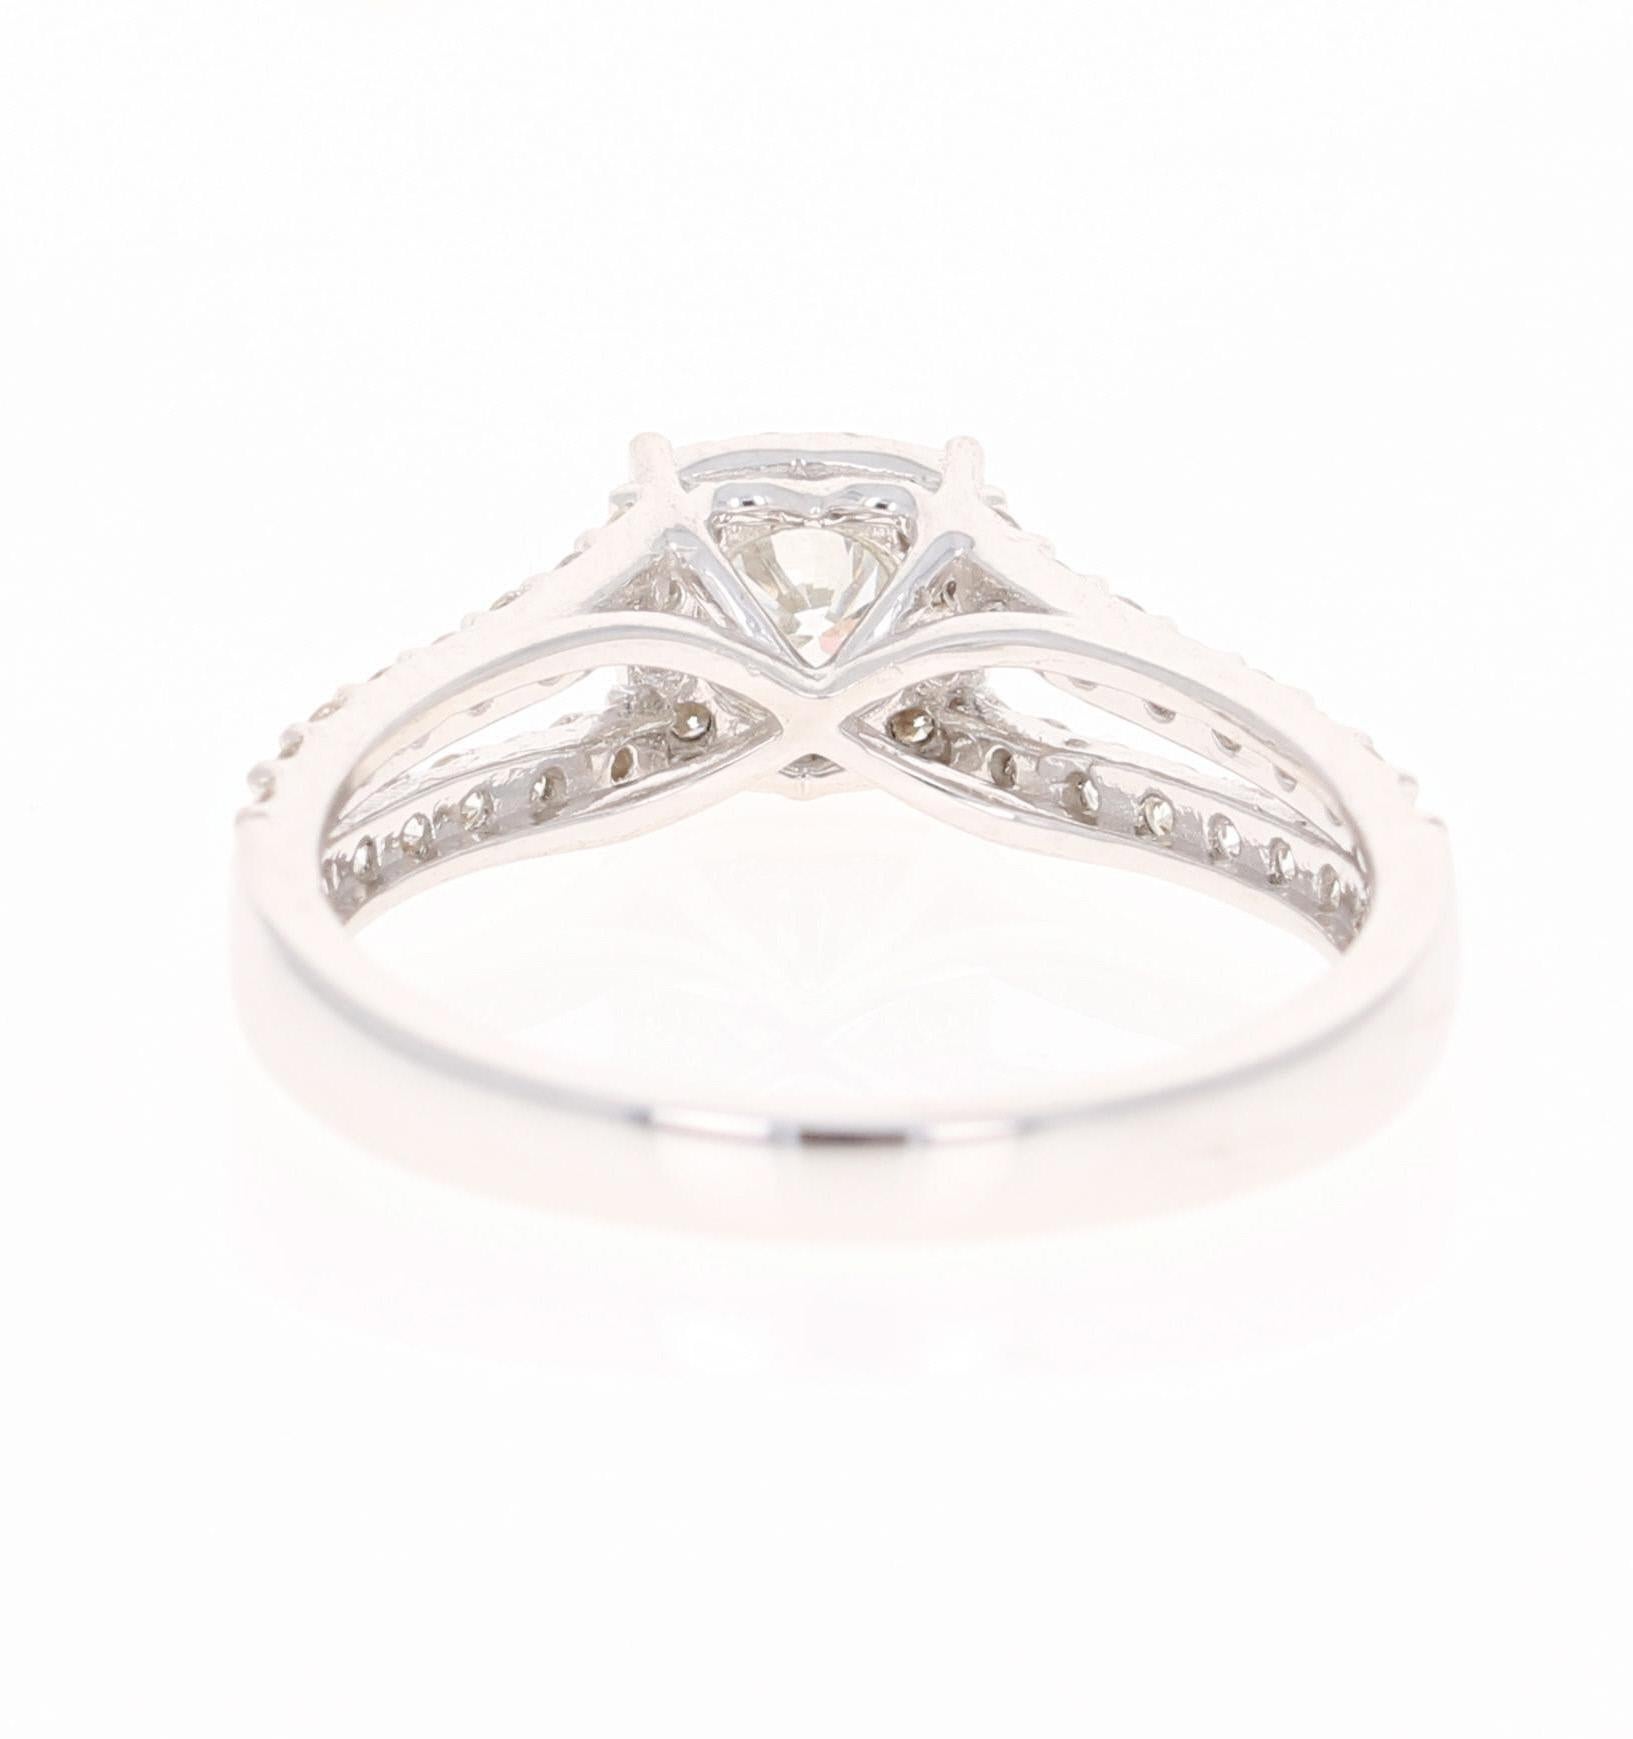 Round Cut 0.95 Carat Diamond White Gold Engagement Ring For Sale